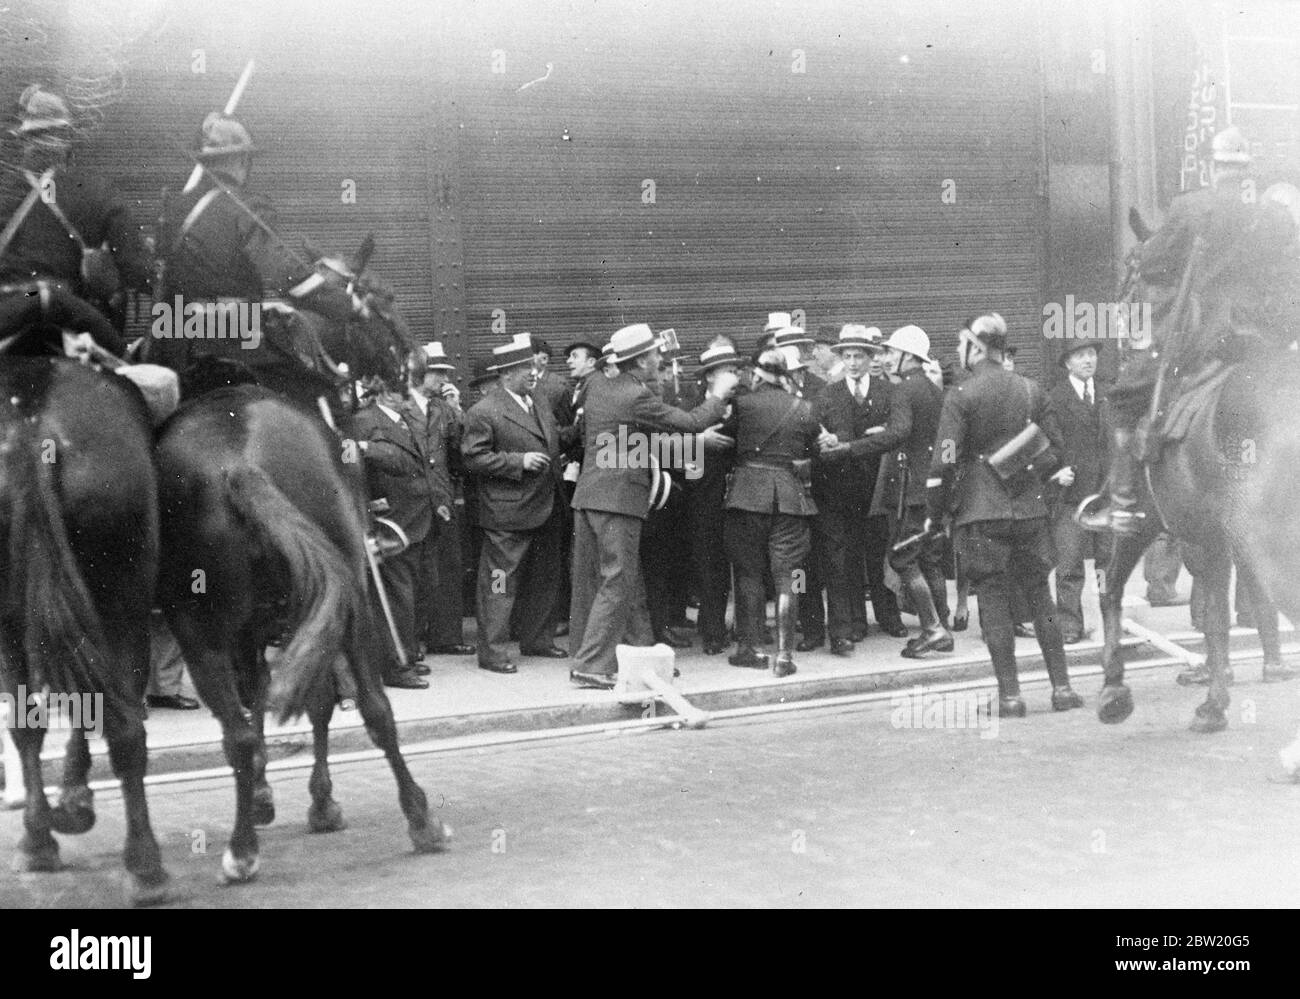 Many injured in Brussels riots. Police clash with war veterans. Fierce fighting broke out in Brussels when 15,000 ex-servicemen and war widows marched through the streets to demonstrate against the granting of an amnesty to Belgians condemned for aiding the enemy during the German occupation in the war. The fighting occurred when war veterans try to break the lines of police guarding a 'neutral'zone surrounding Government offices. Many police and demonstrators were injured. Demands were made for the resignation of the Government and 400 ex-soldiers lay down on the pavements in front of the Roy Stock Photo